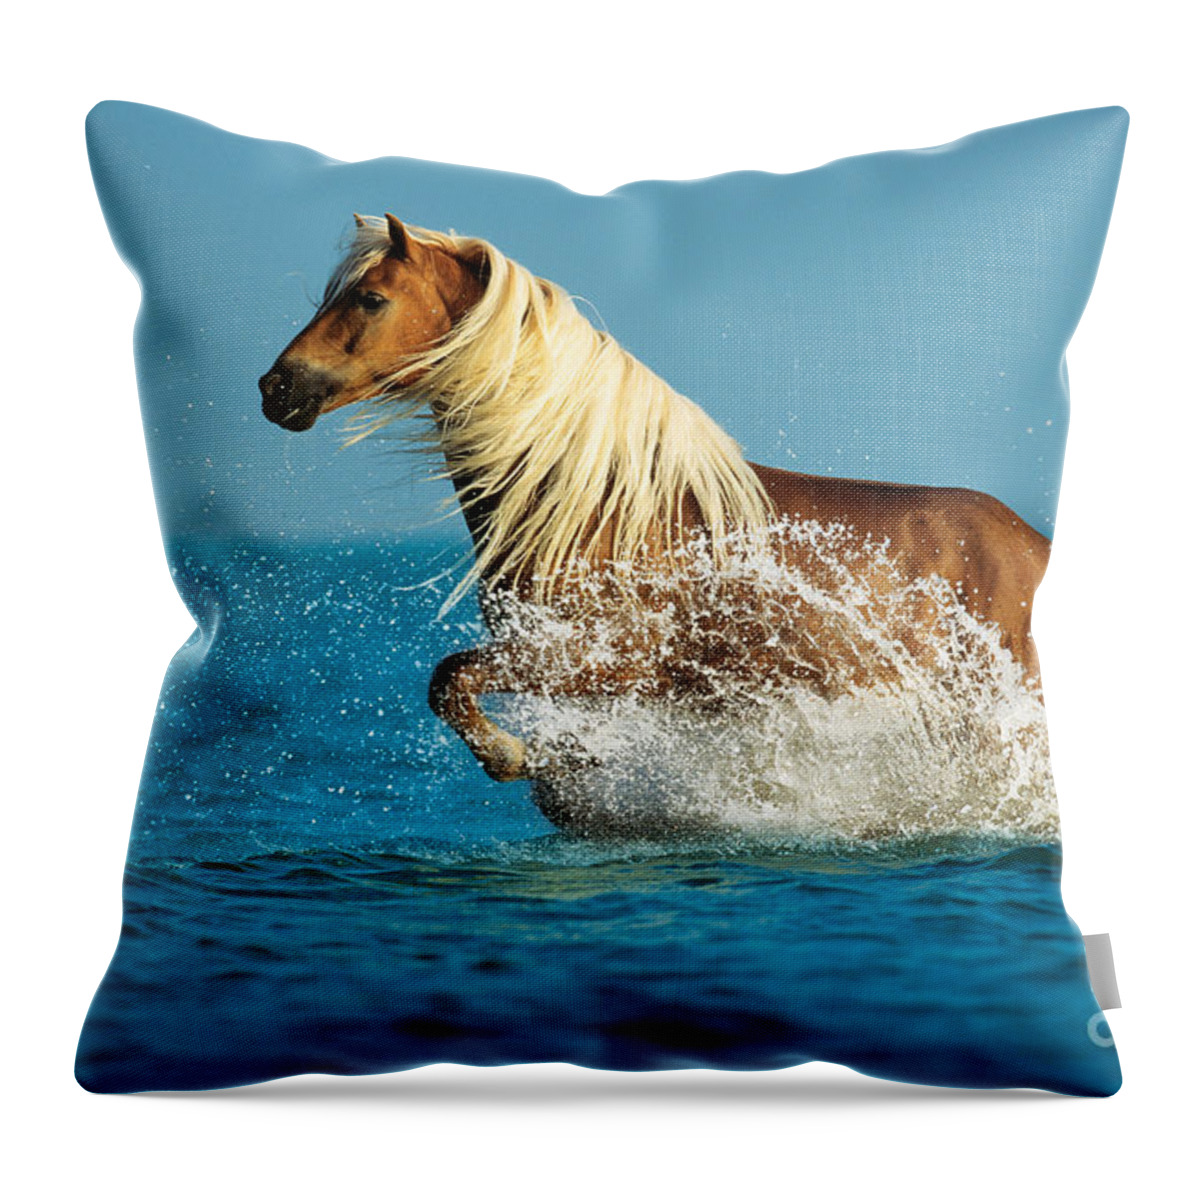 Haflinger Throw Pillow featuring the photograph Haflinger Horse by Gabriele Boiselle